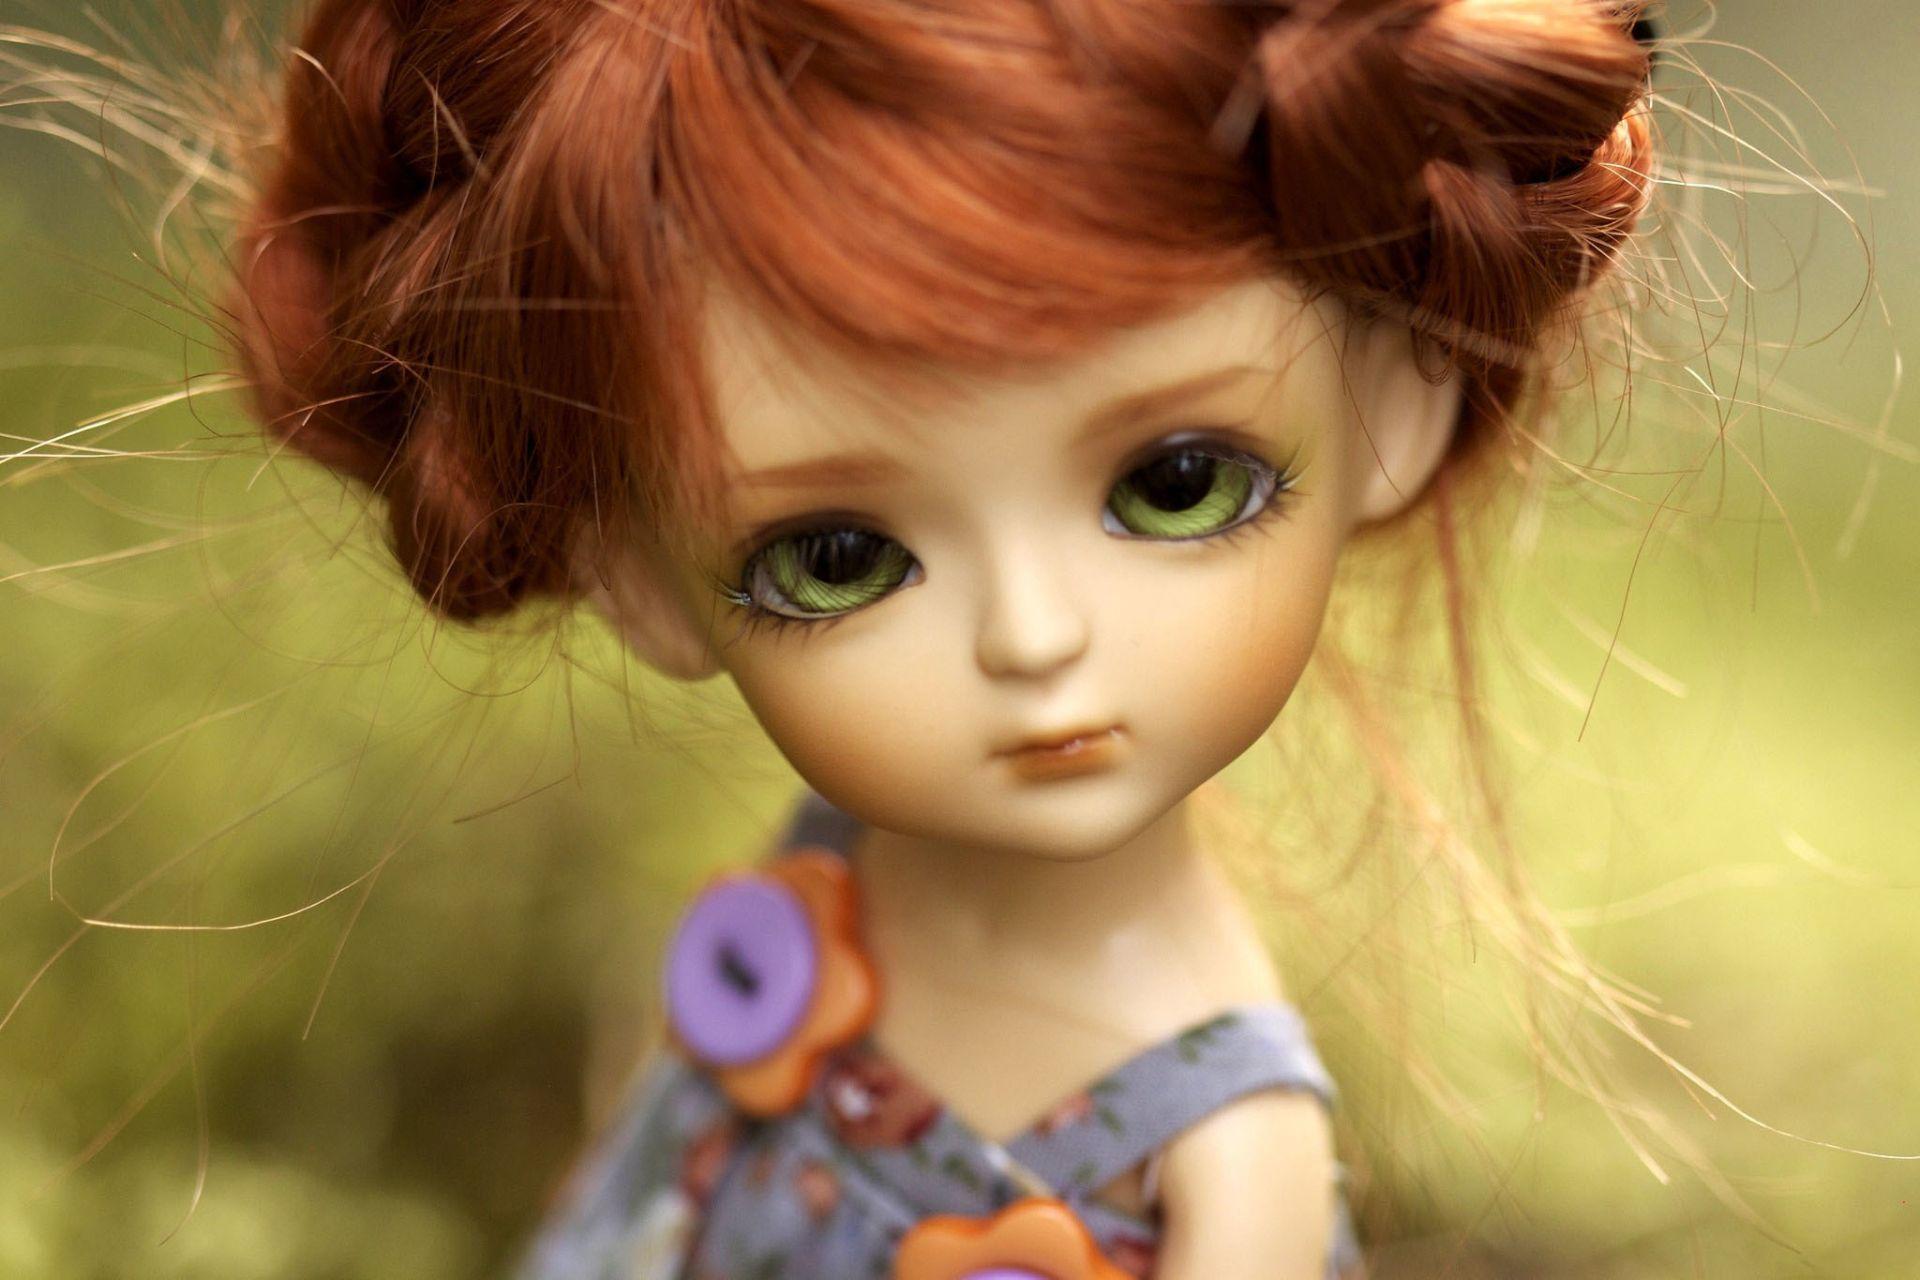 Cute Doll wallpapers